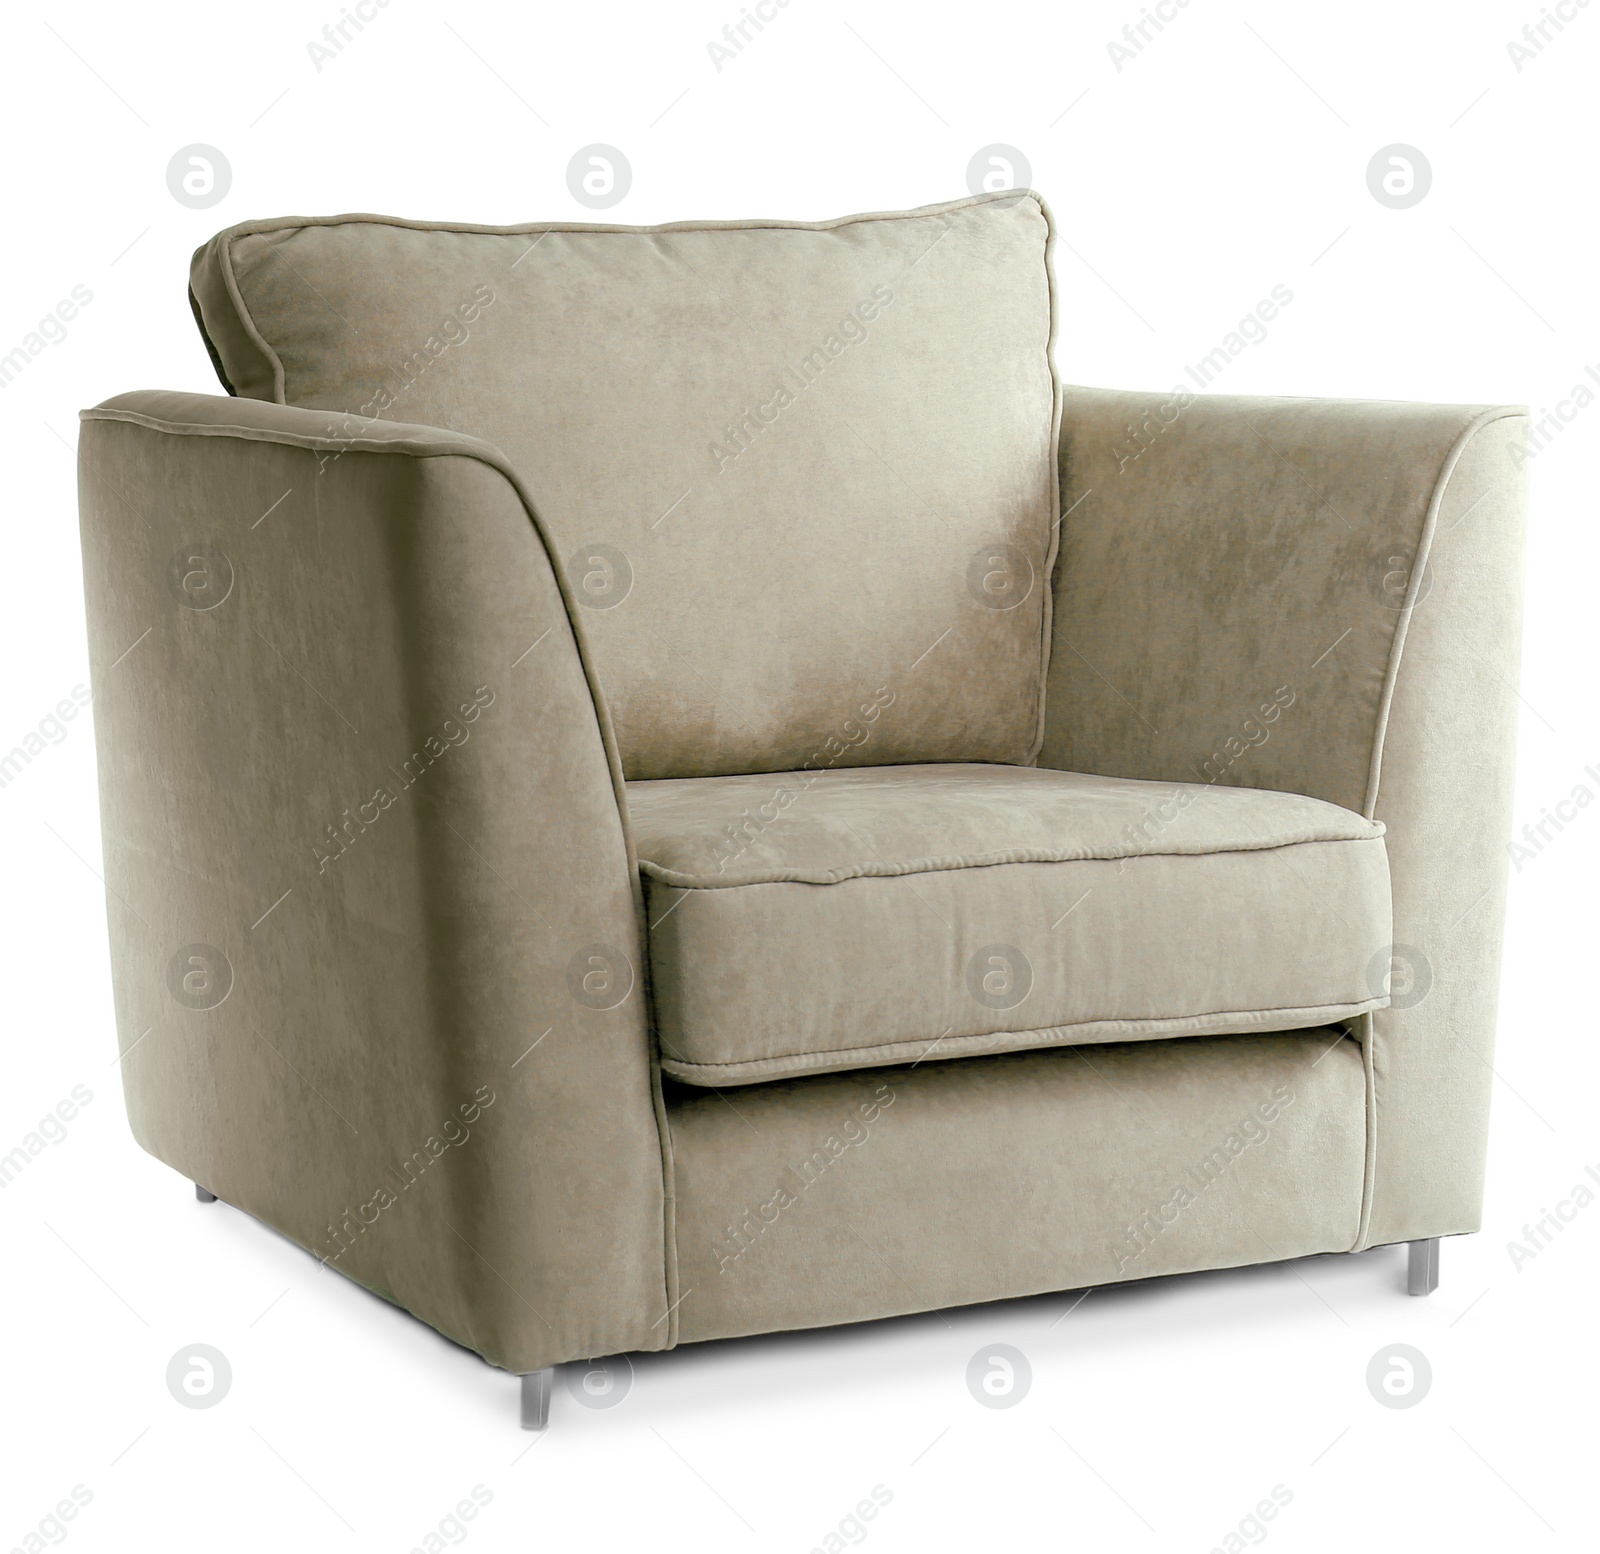 Image of One comfortable yellowish gray armchair isolated on white